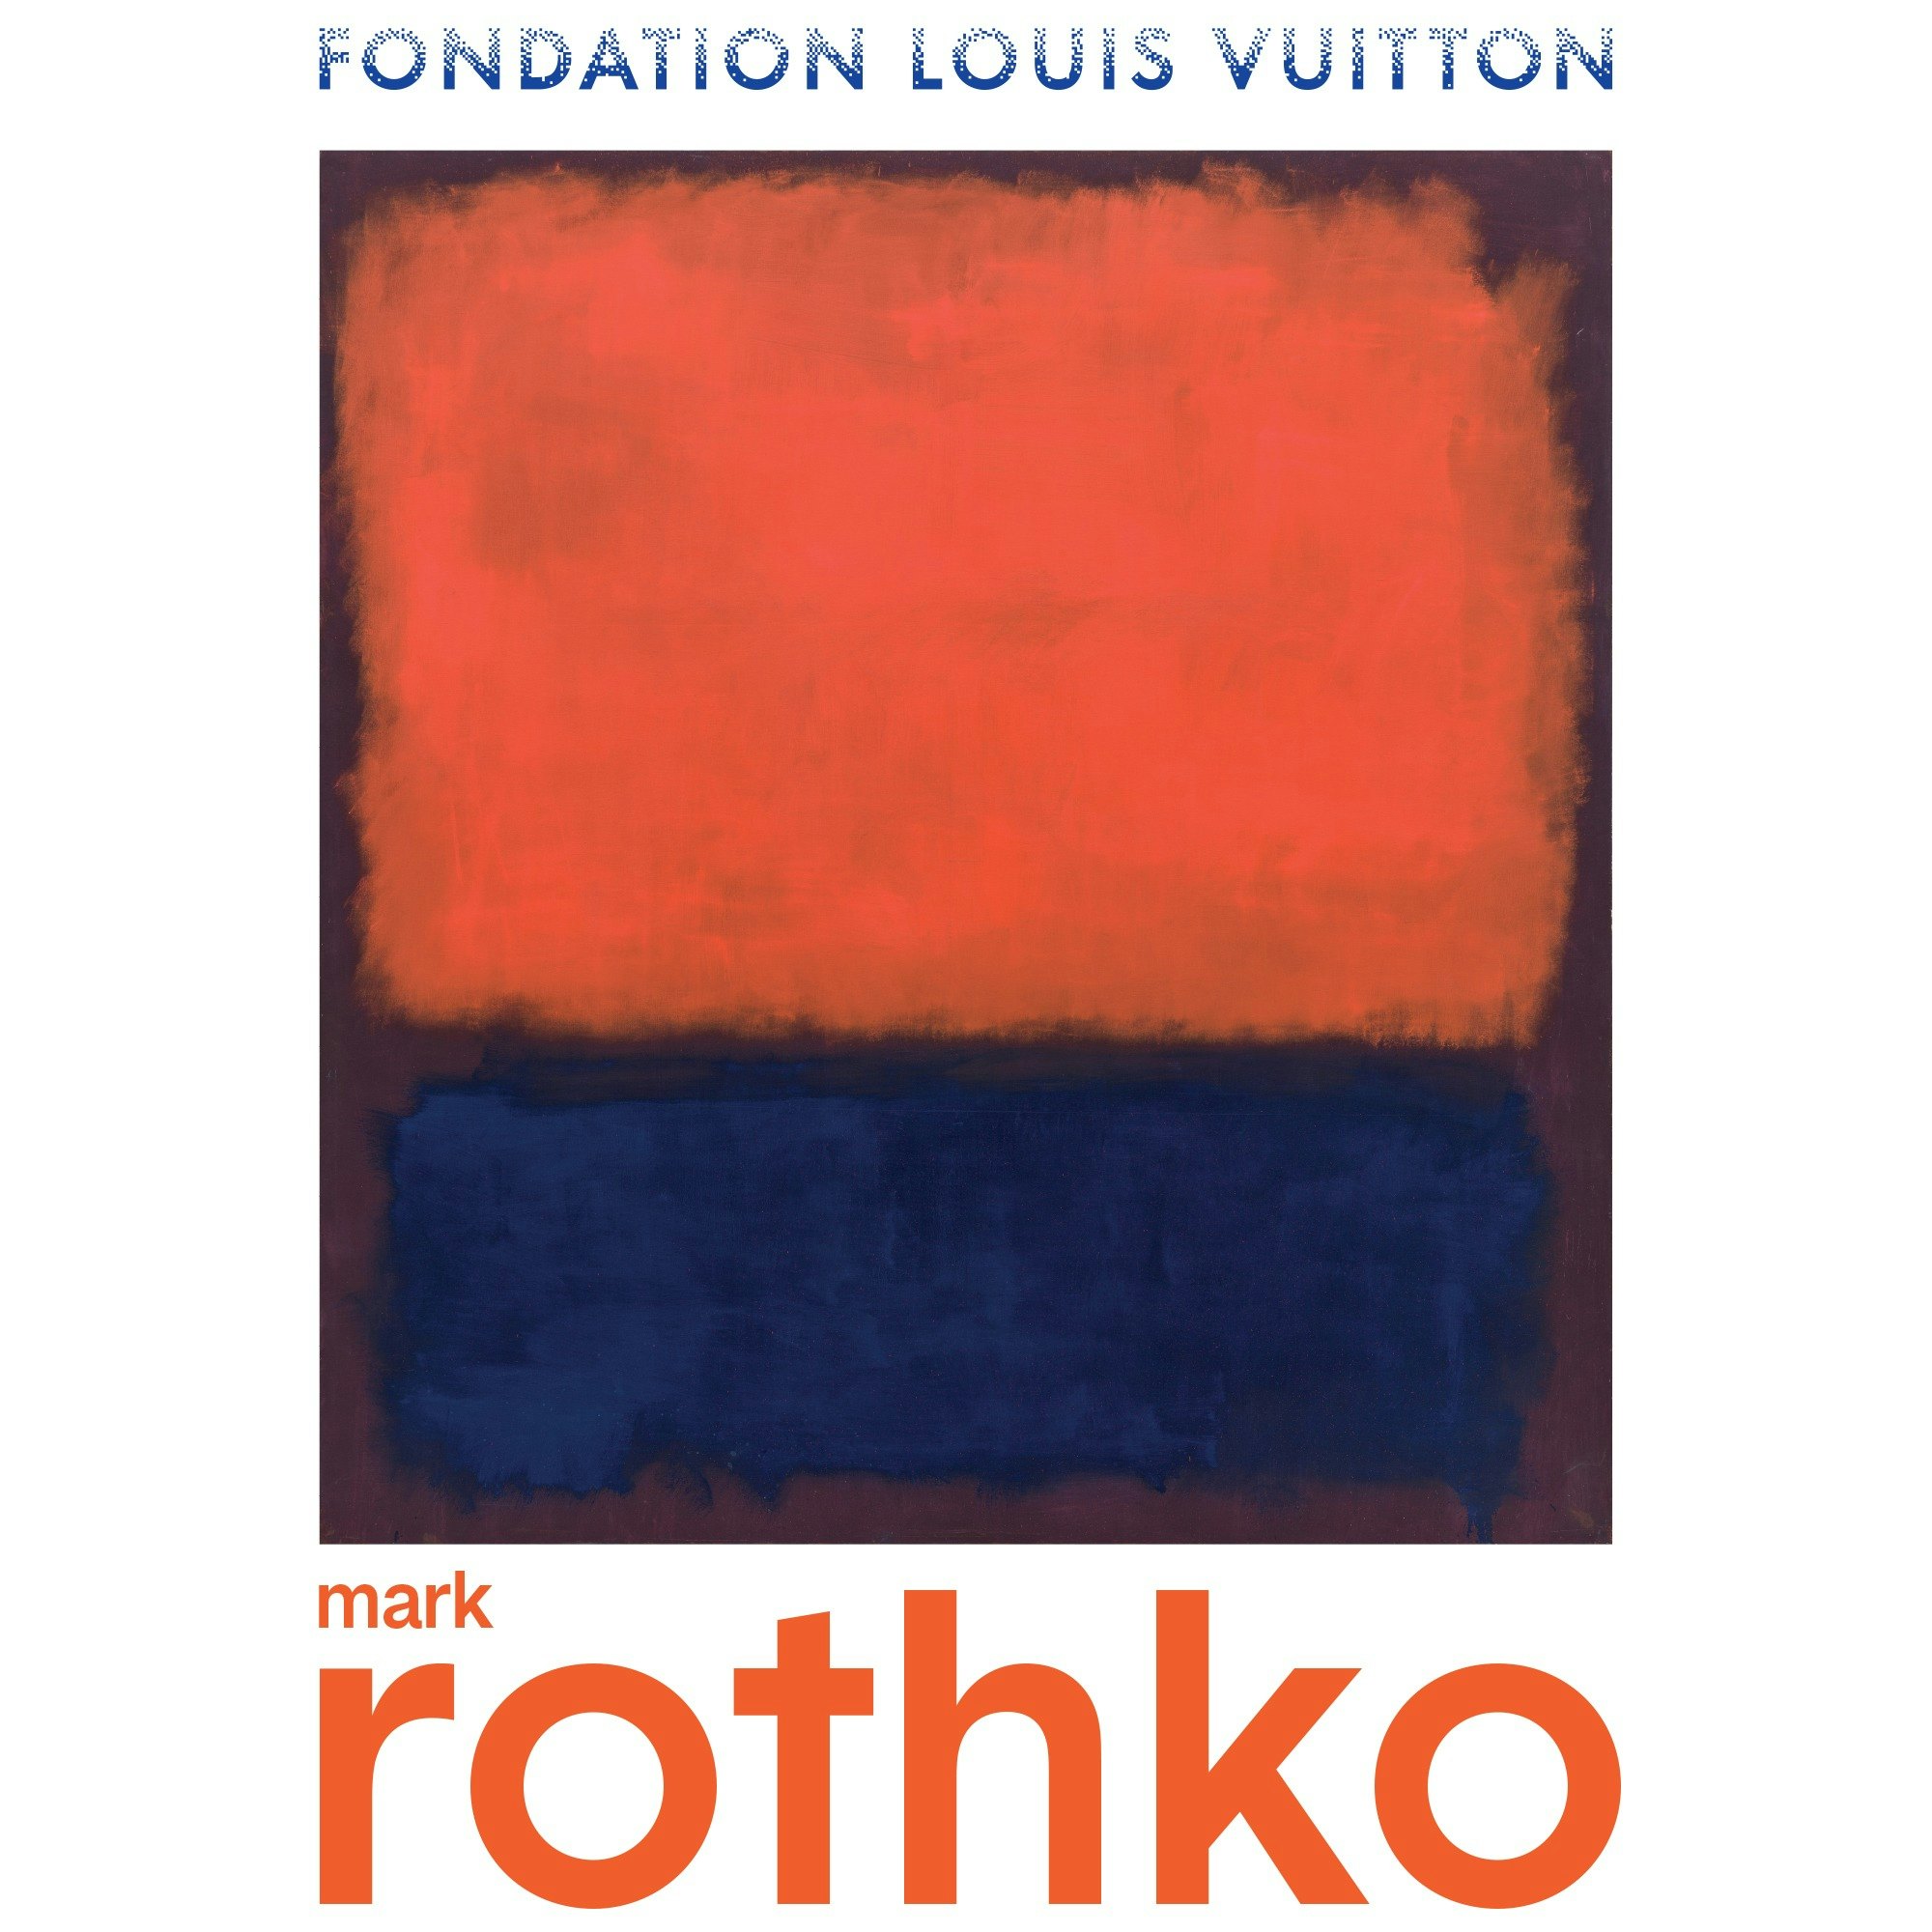 Mark Rothko exhibition and admission to the Fondation Louis Vuitton